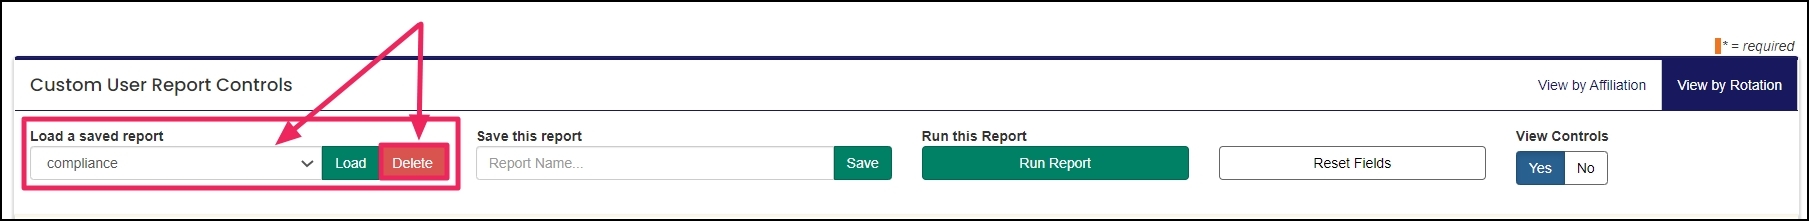 image showing arrows pointing to the delete button and the drop-down menu under the load a saved report field